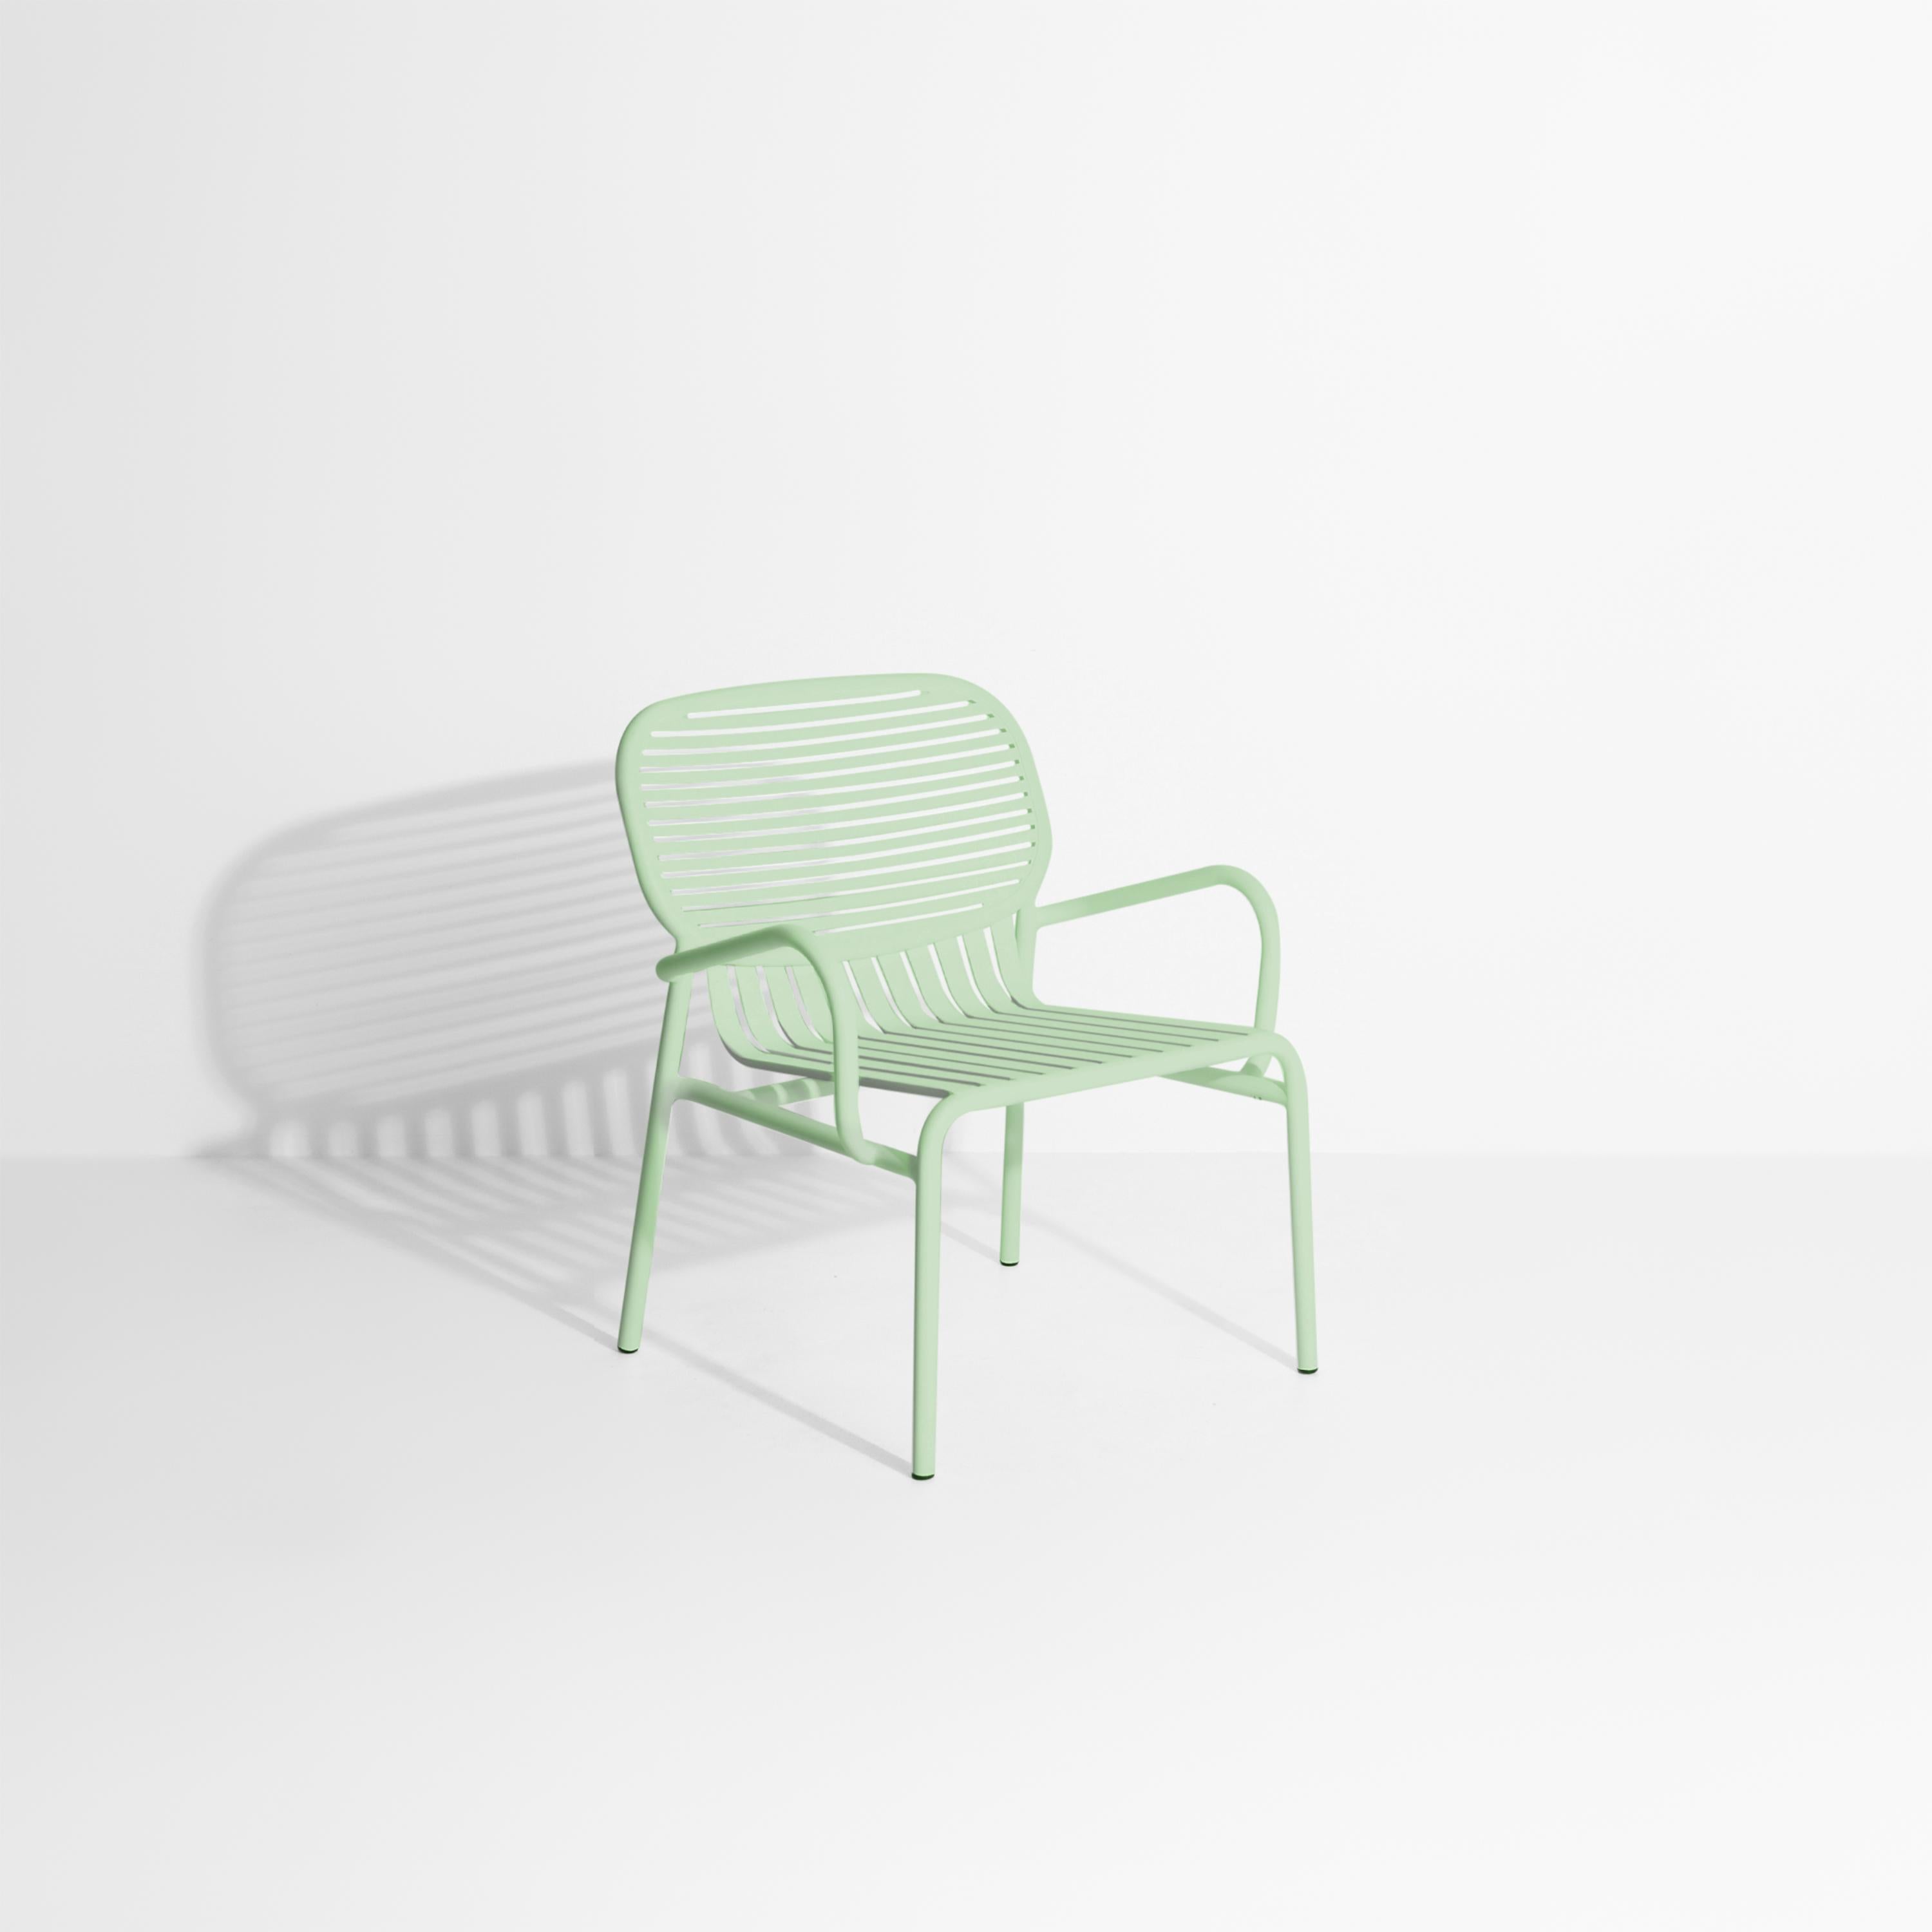 Petite Friture Week-End Armchair in Pastel Green Aluminium by Studio BrichetZiegler, 2017

The week-end collection is a full range of outdoor furniture, in aluminium grained epoxy paint, matt finish, that includes 18 functions and 8 colours for